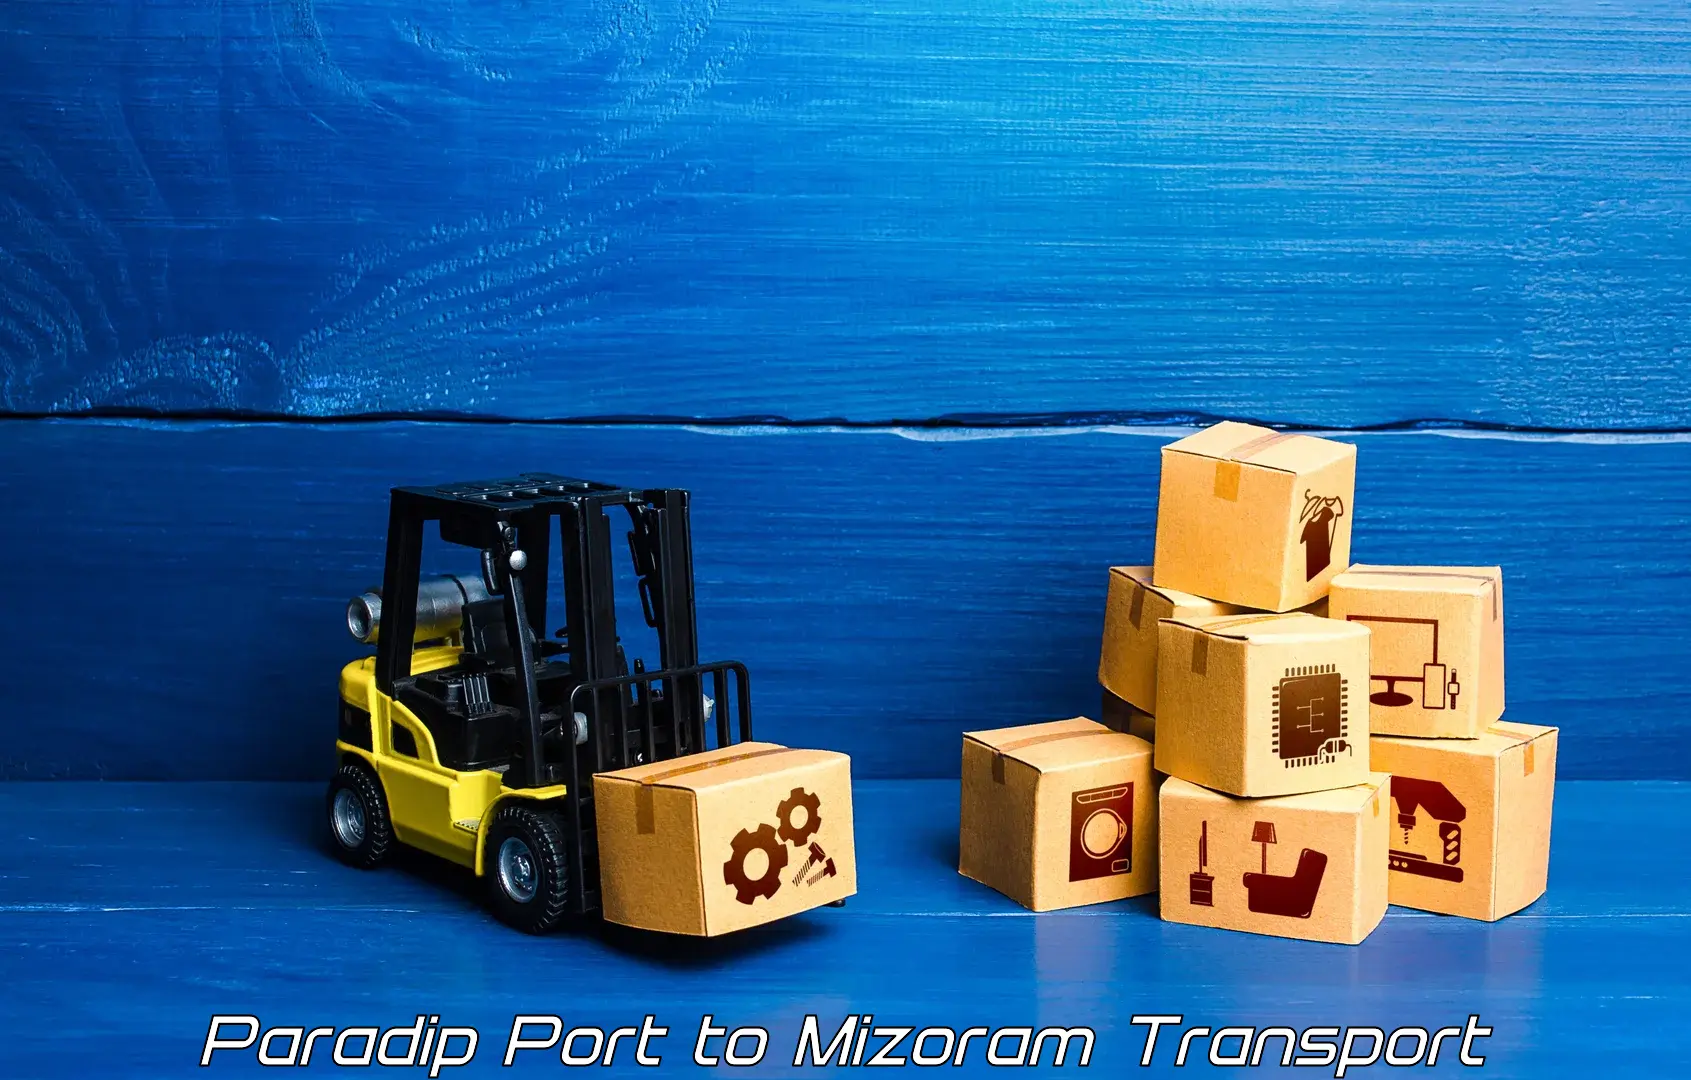 Nationwide transport services Paradip Port to Siaha